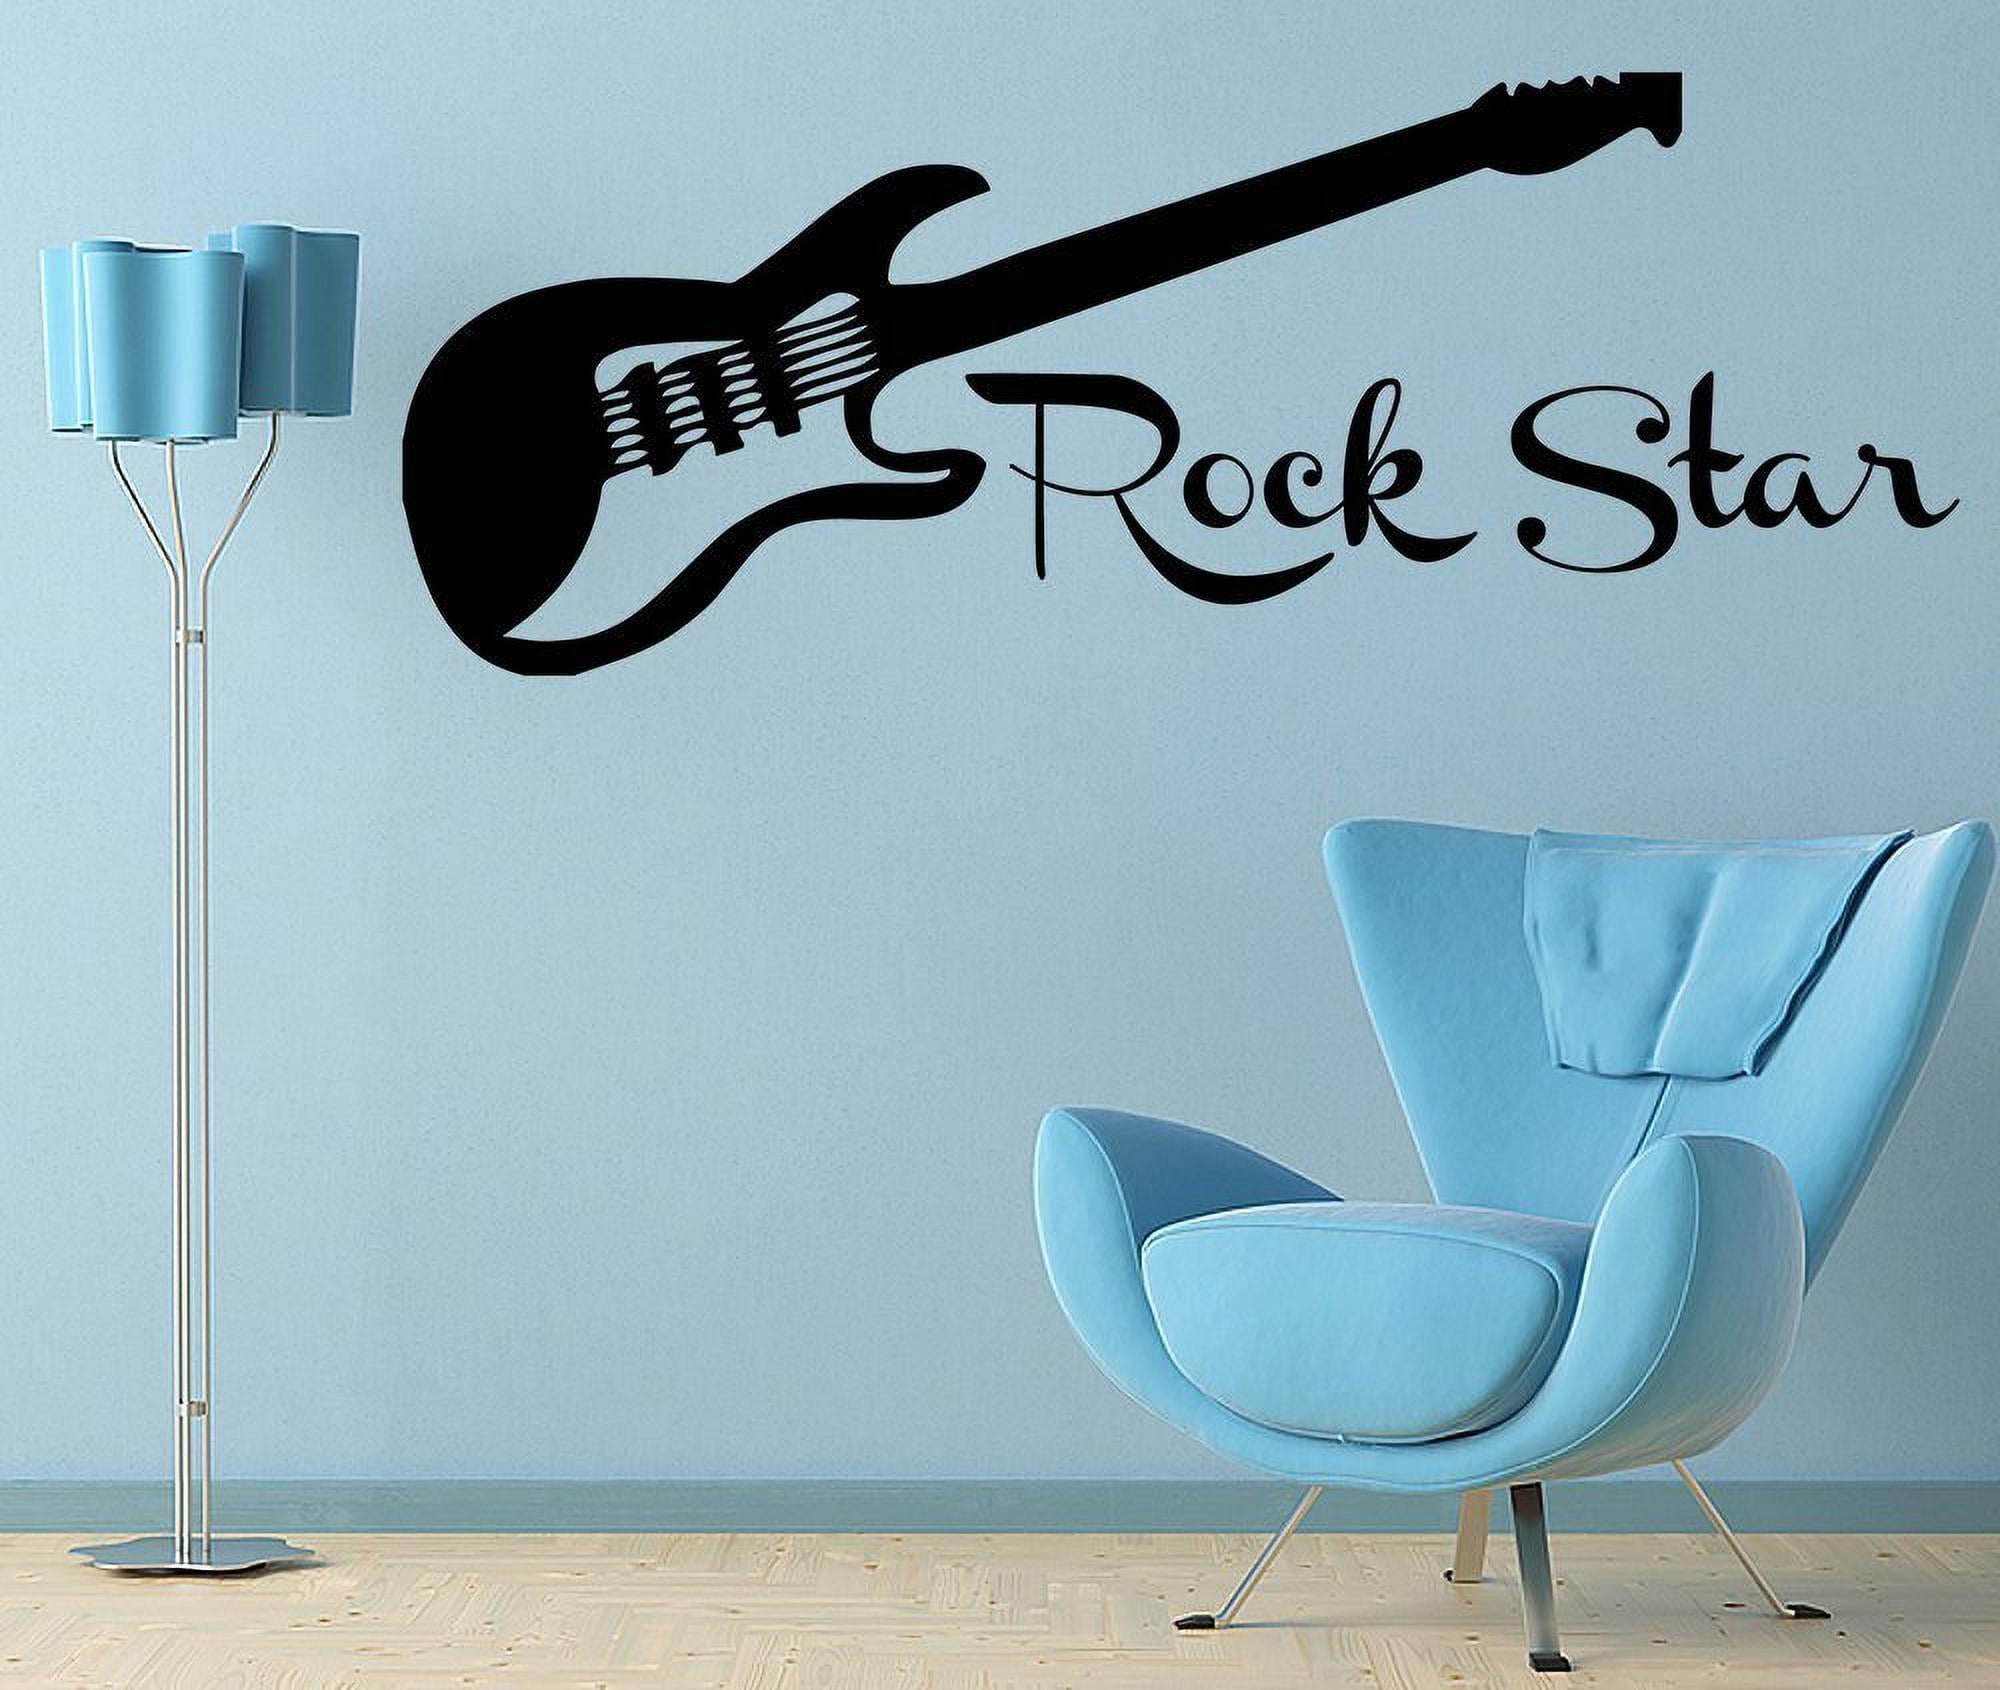 Three Pieces Tribal Electric Guitar Wall Decor Art Music Wall Sticker for Home Living Room DIY Vinyl Removable Wall Decal for Bedroom Kids Room TM-59 Black